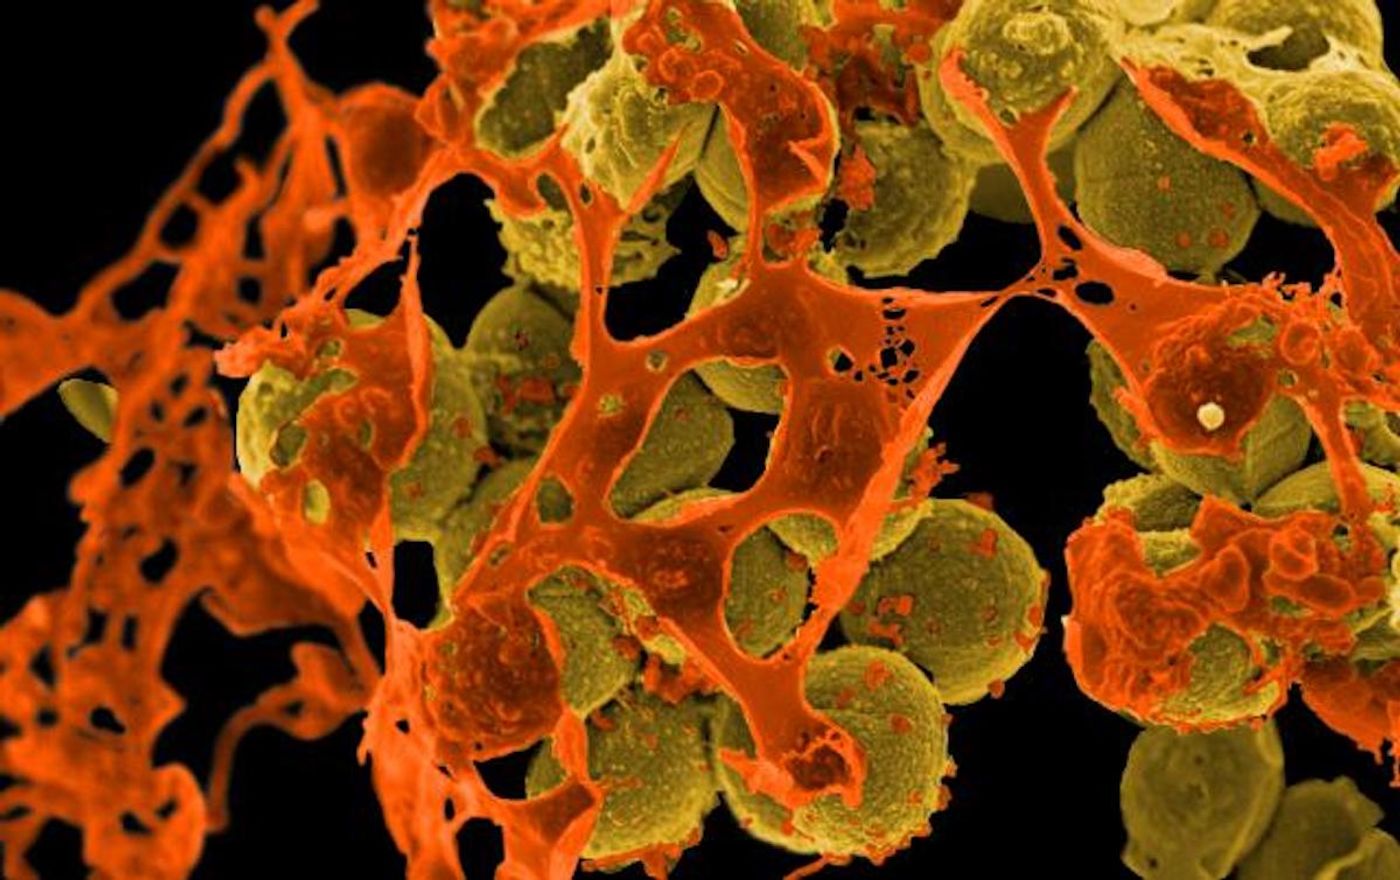 Methicillin-Resistant Staphylococcus aureus (MRSA) Bacteria  Scanning electron micrograph of methicillin-resistant Staphylococcus aureus (MRSA, yellow) surrounded by cellular debris. / Credit: NIAID